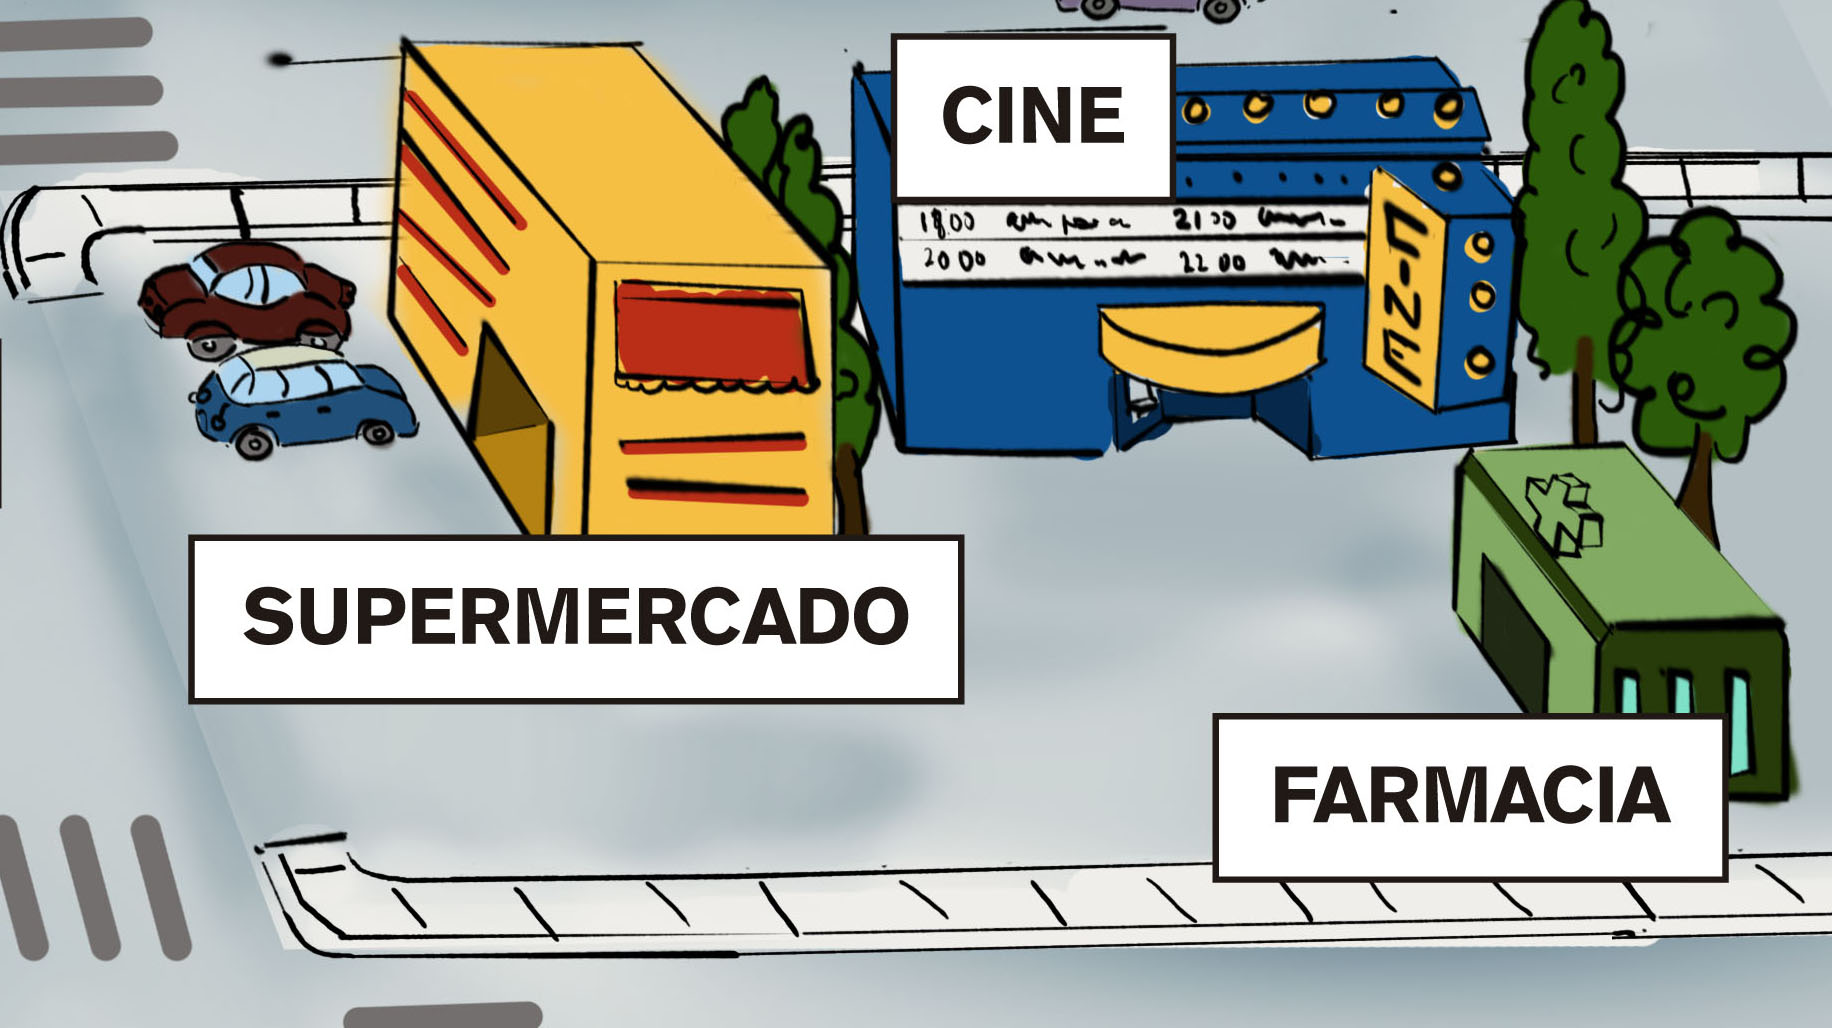 How To Get To The Supermarket Cinema Or Pharmacy